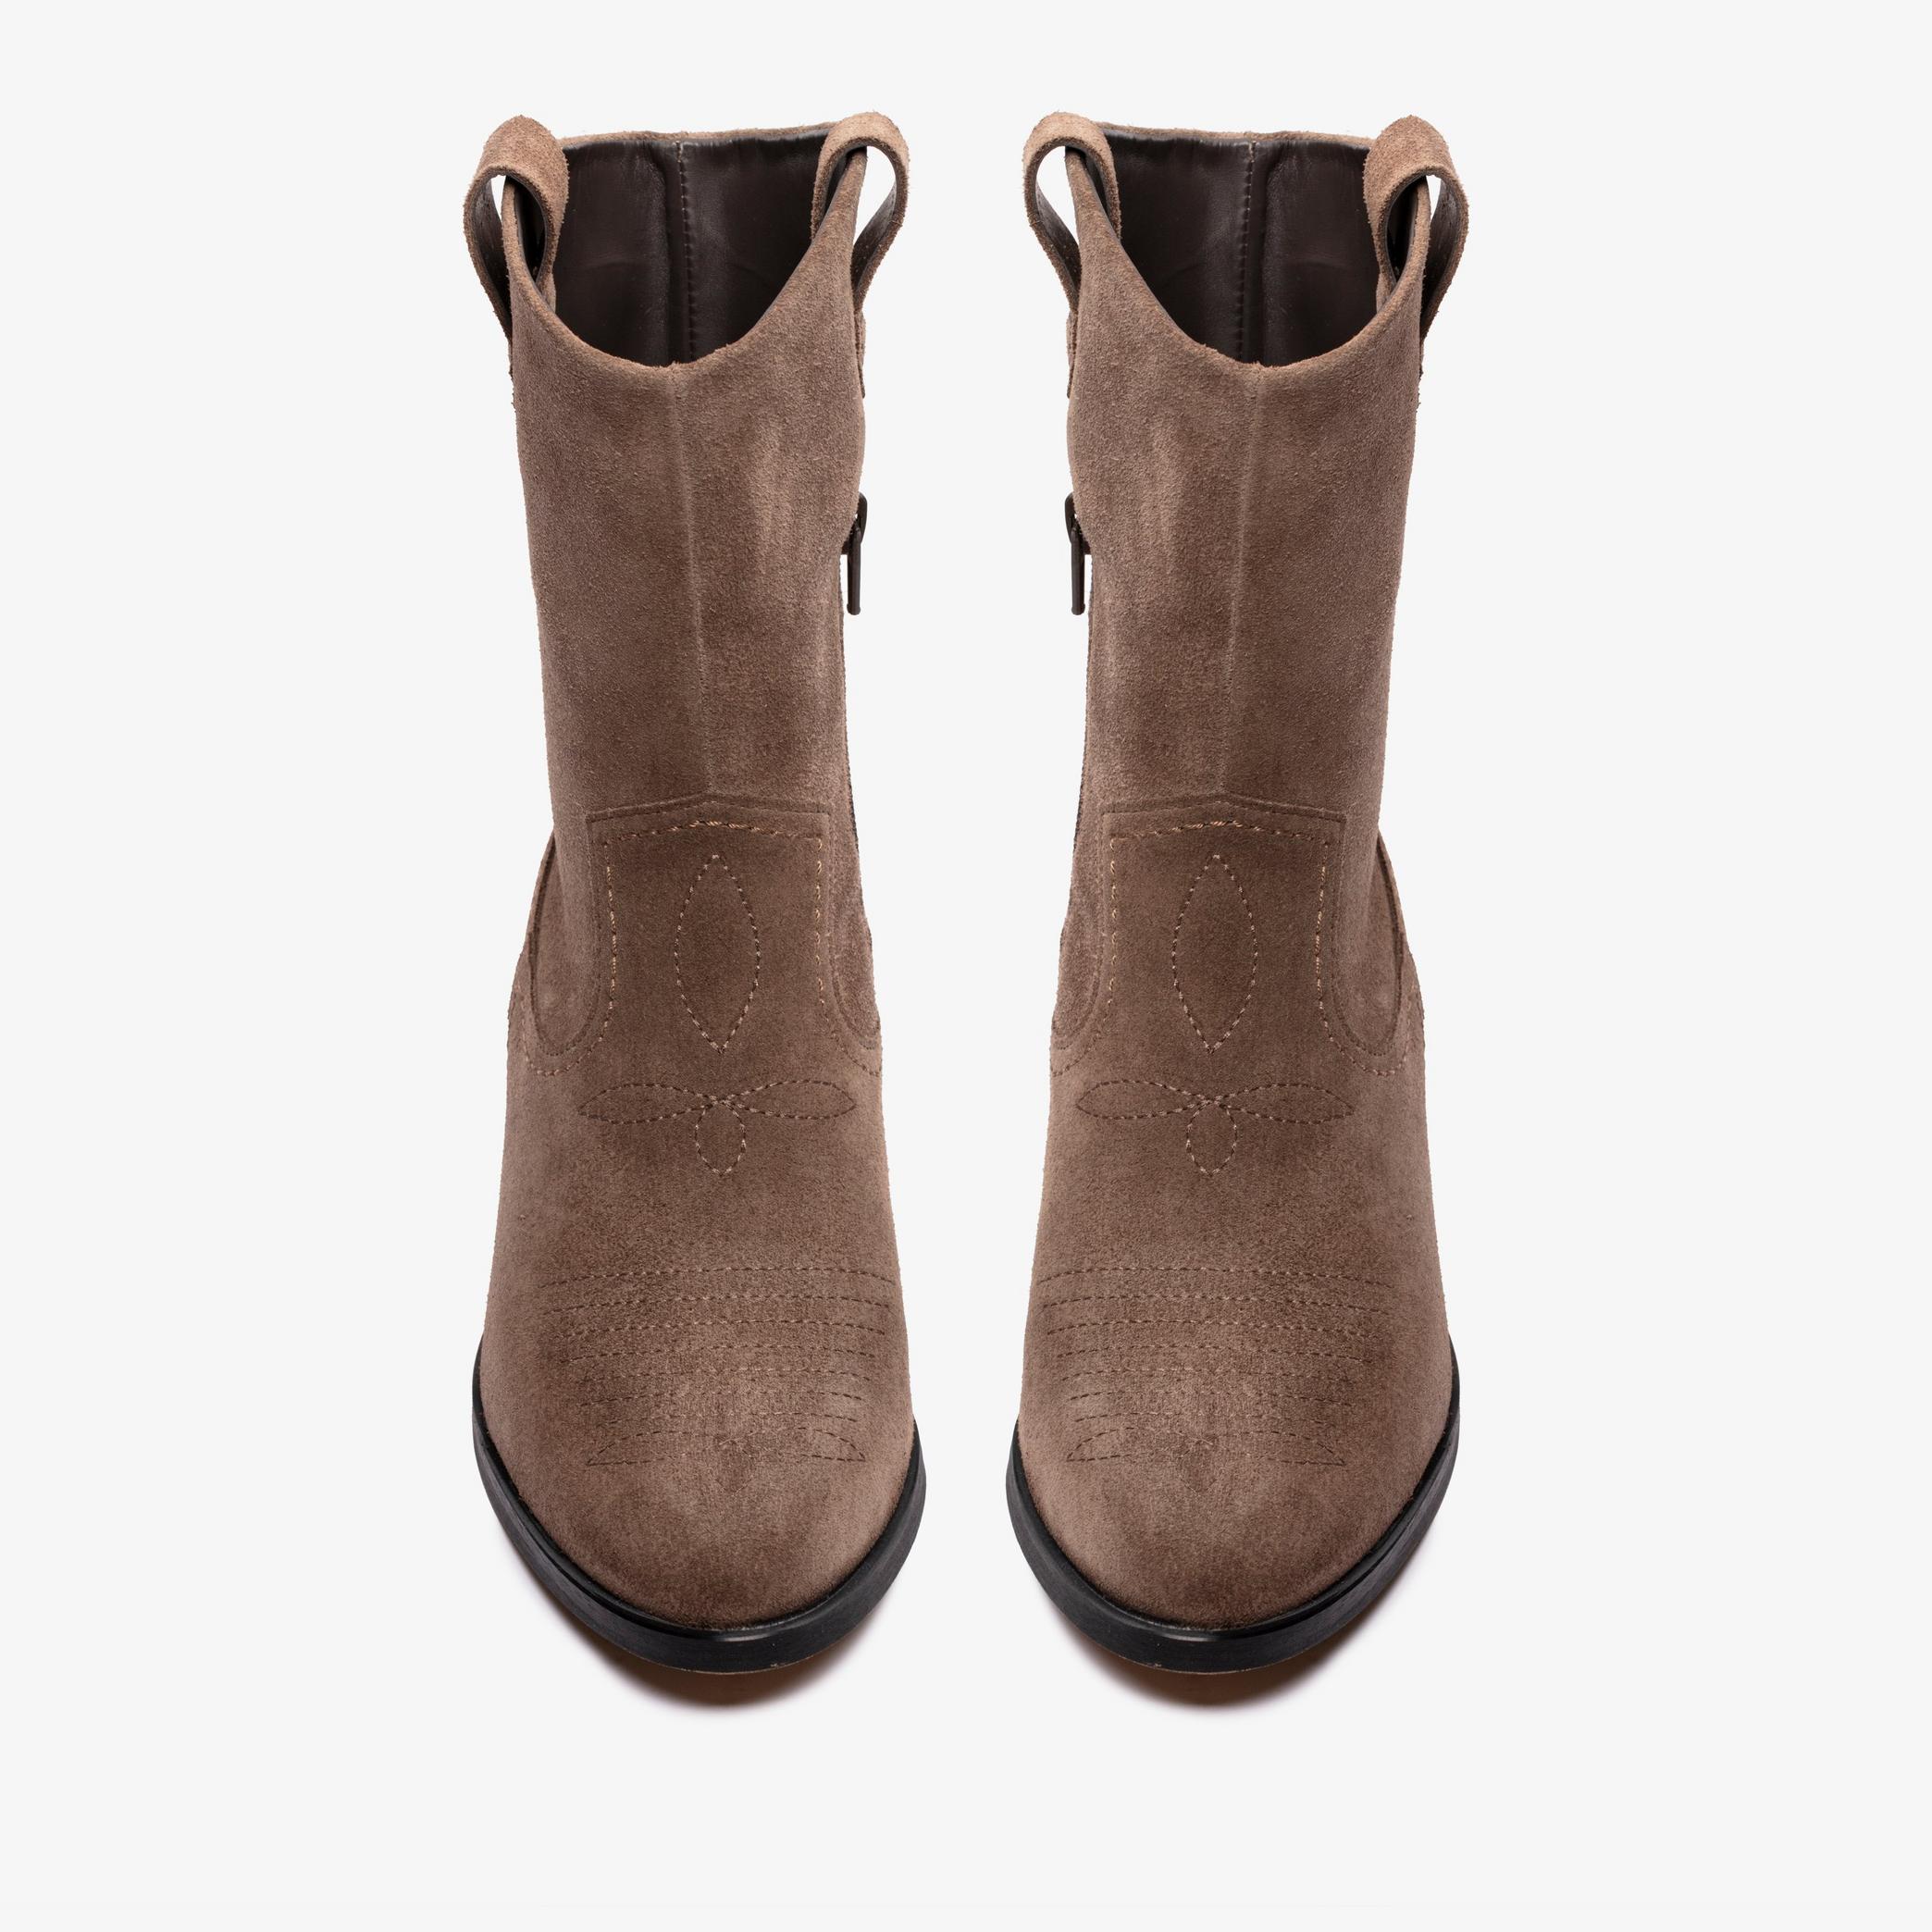 Octavia Up Taupe Suede Mid Calf Boots, view 6 of 6